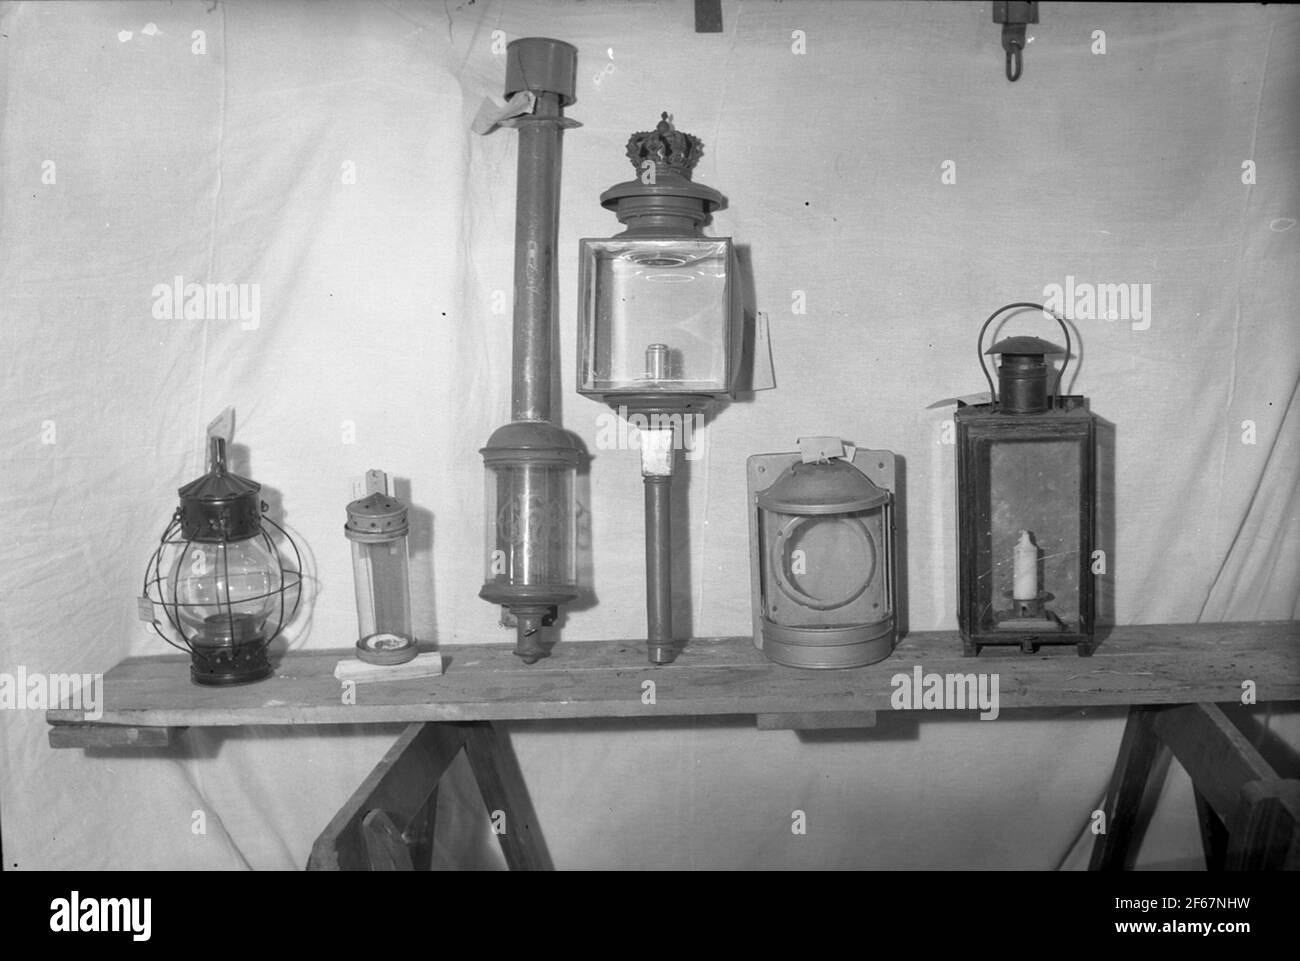 Div lanterns; Railway Museum. Horse Carriage Lamp Dome Ark # 1301 Wall Lamp  for Shortcores VKB Ark # 1333 Wall Lamp for Shortcar VKB Ark # 1611 Lantern  Fr Carl XV Wagon